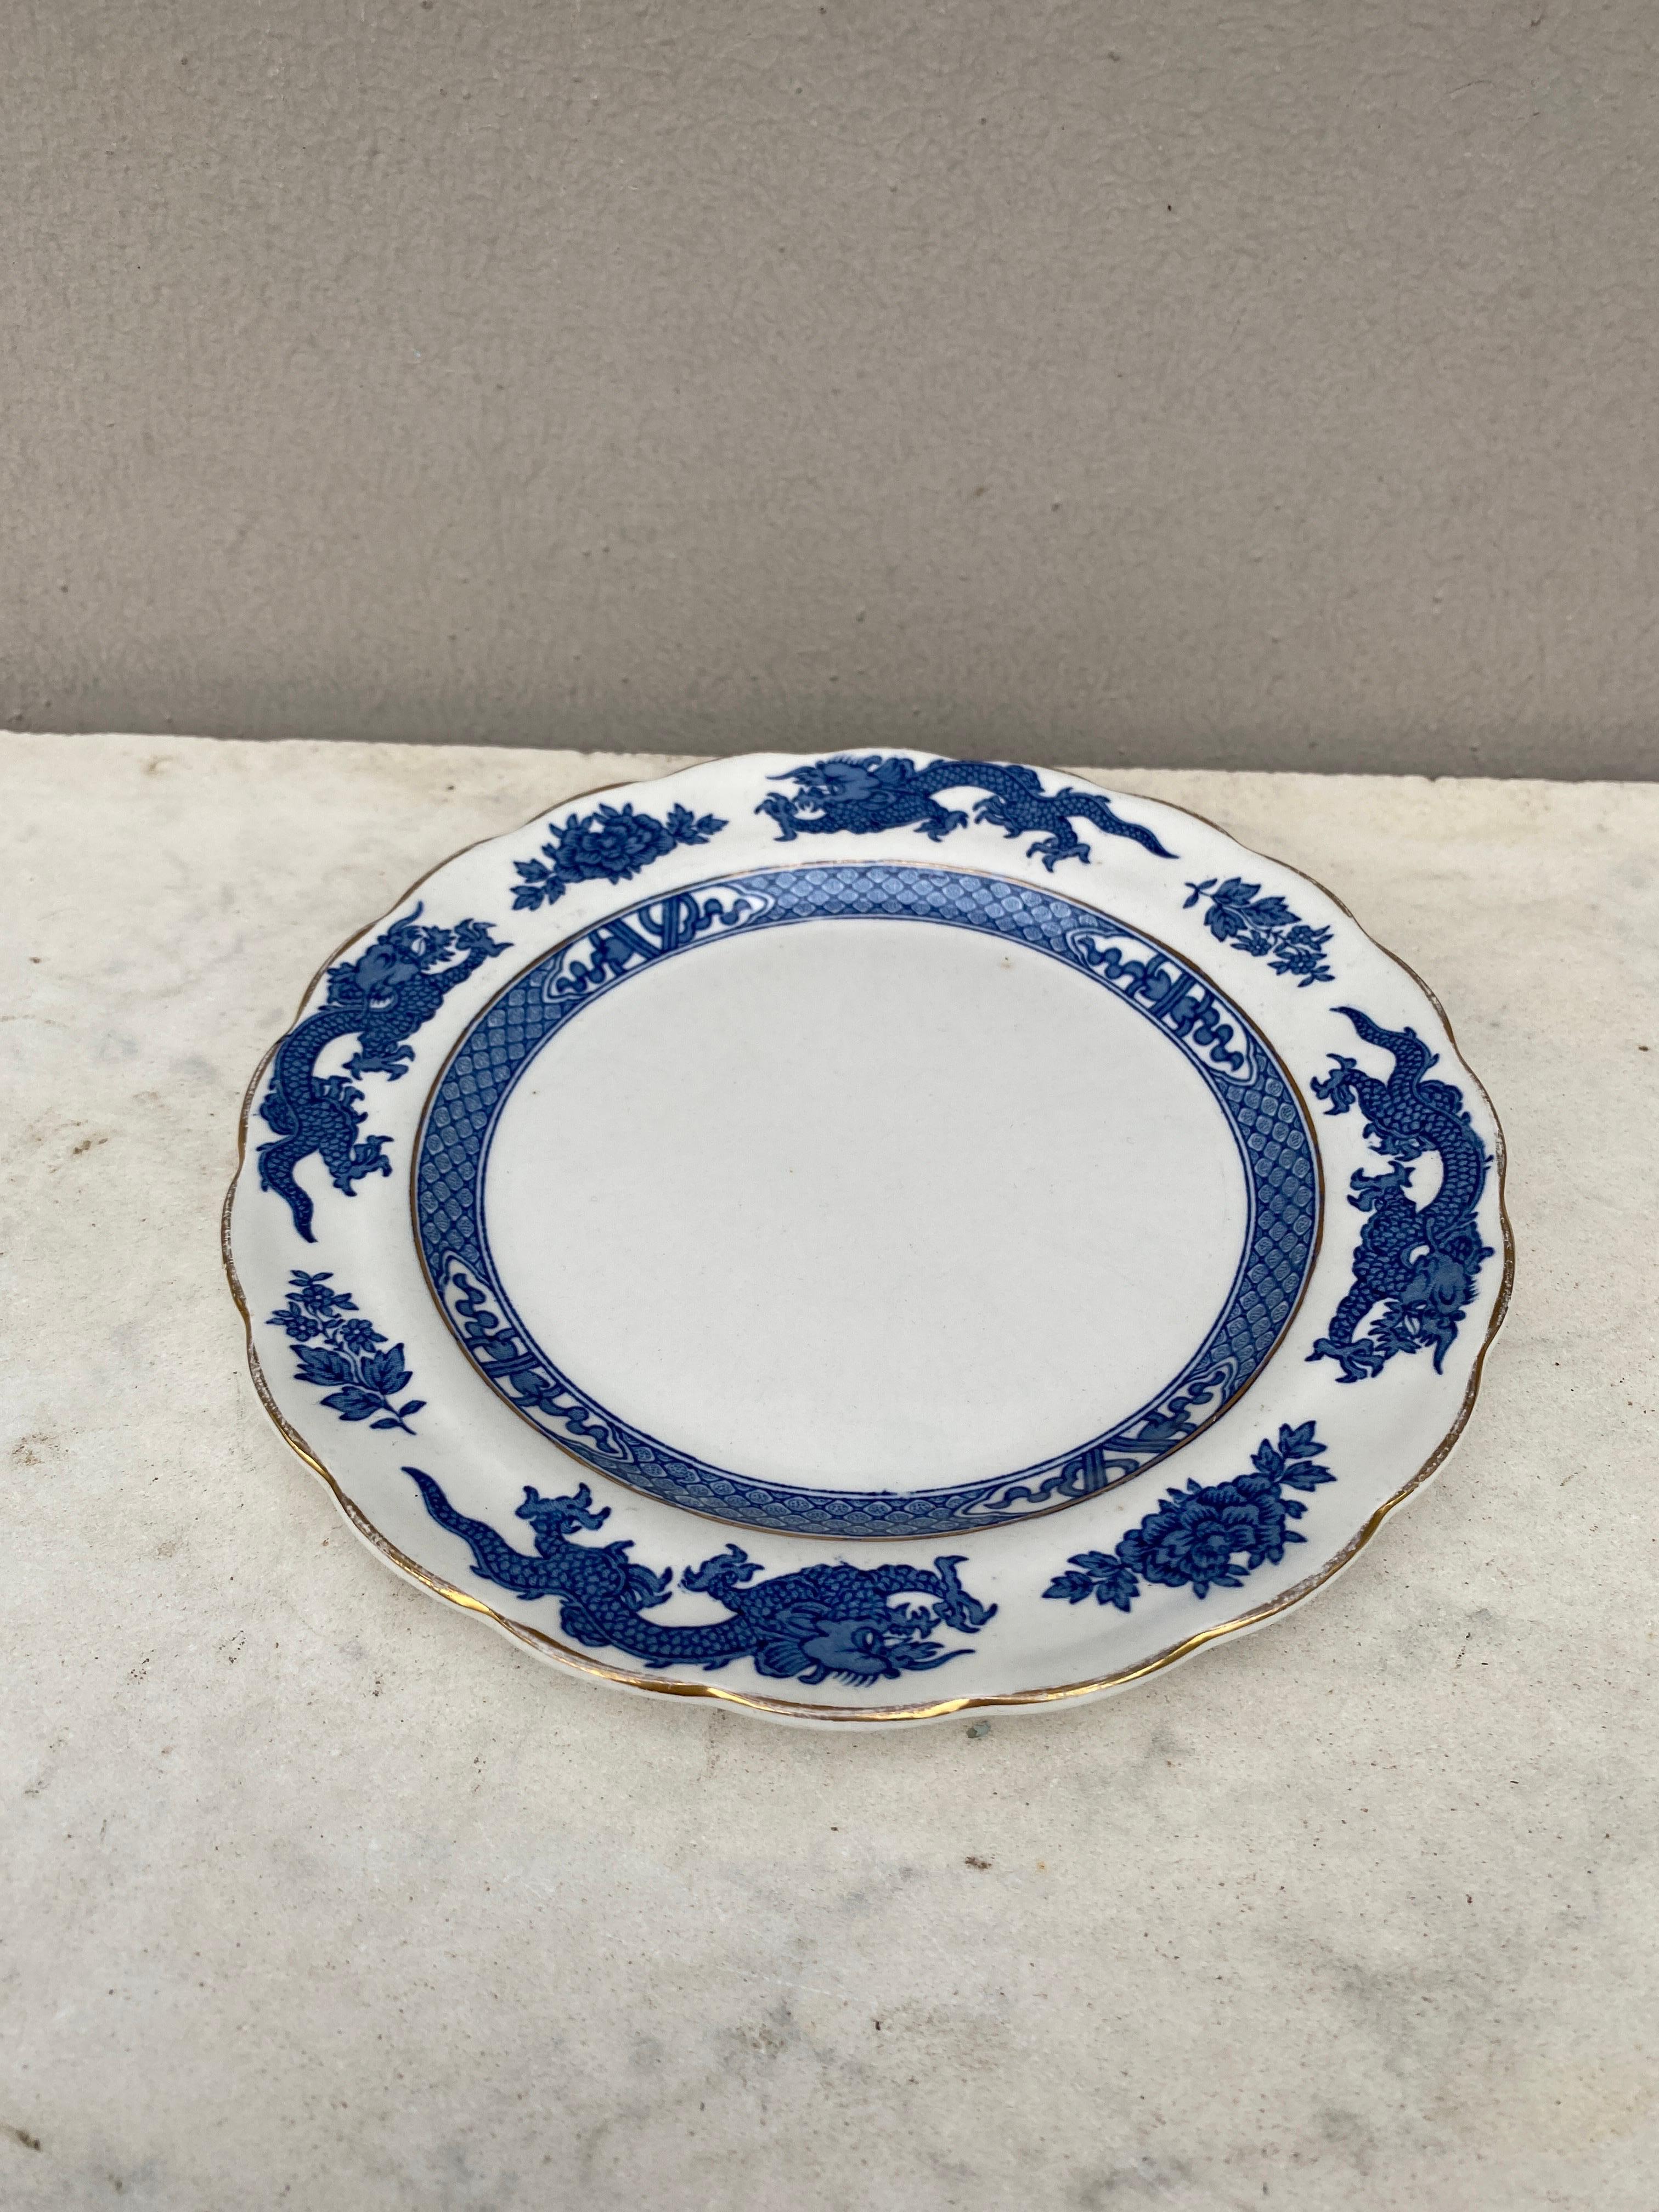 English Blue & White Dragon Plate Circa 1920.
Signed Booths.